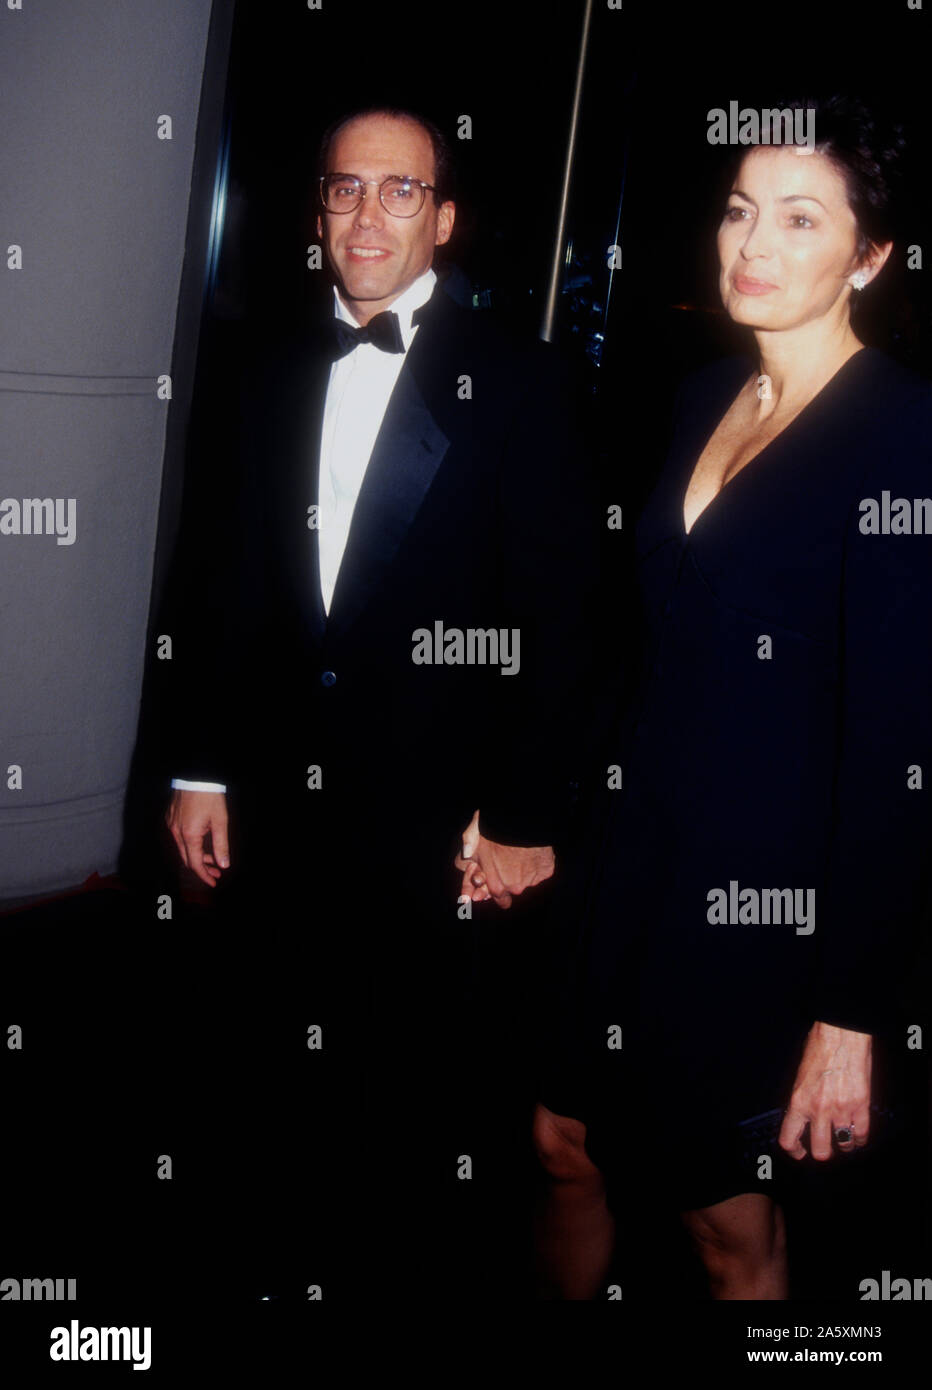 Beverly Hills, California, USA 2nd March 1995 Producer Jeffrey Katzenberg and wife Marilyn Katzenberg attend the 23rd Annual American Film Institute (AFI) Lifetime Achievement Award Salute to Steven Spielberg on March 2, 1995 at the Beverly Hilton Hotel in Beverly Hills, California, USA. Photo by Barry King/Alamy Stock Photo Stock Photo